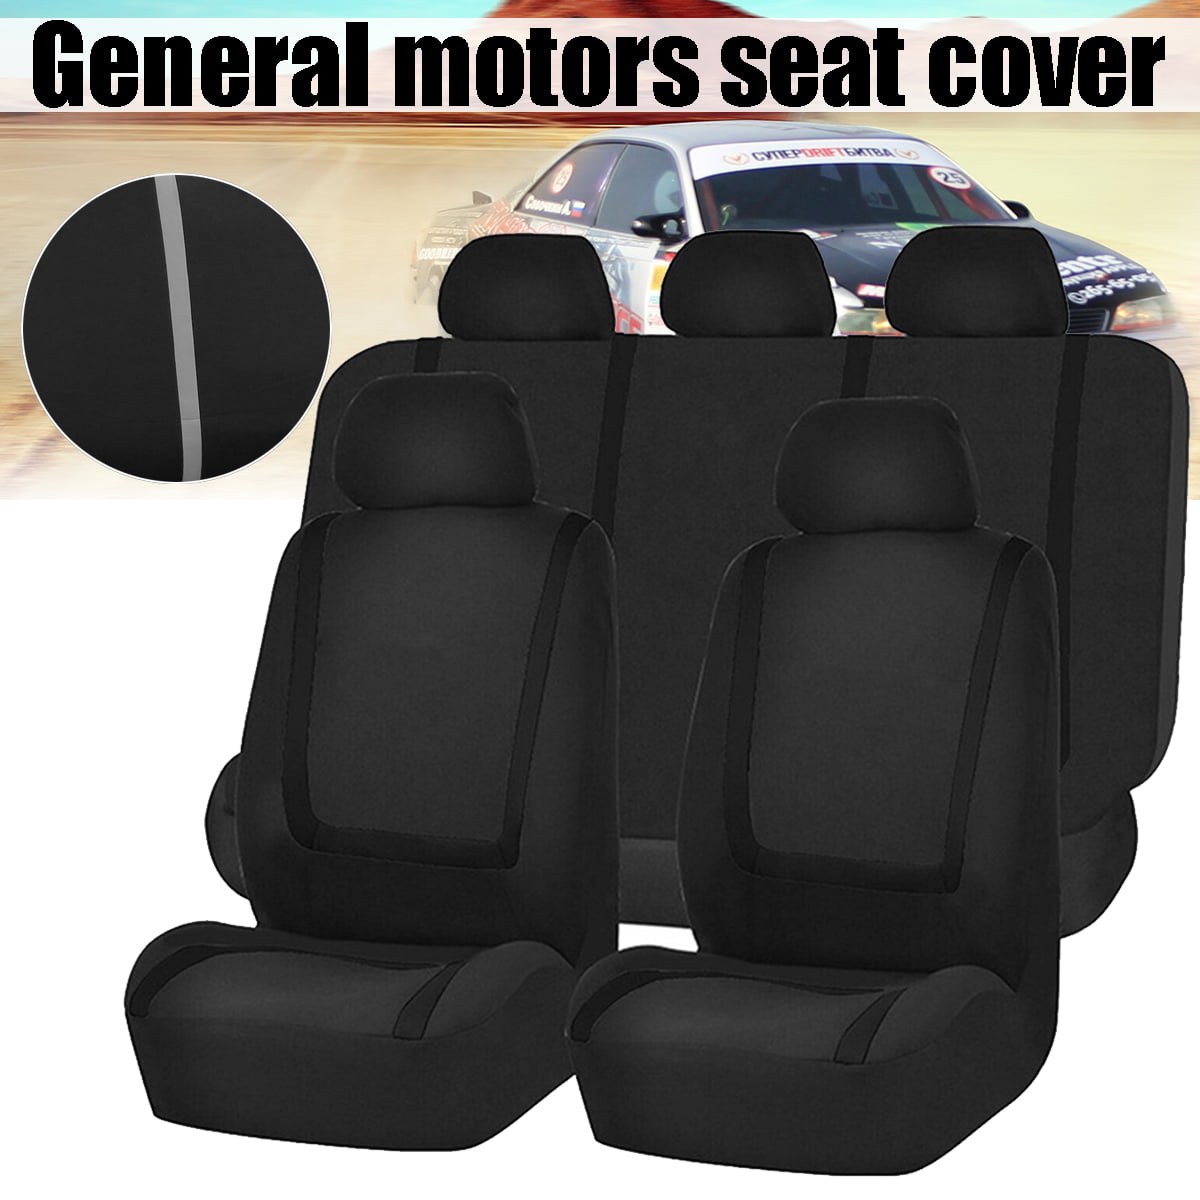 2 BLACK FRONT CAR SEAT COVERS 